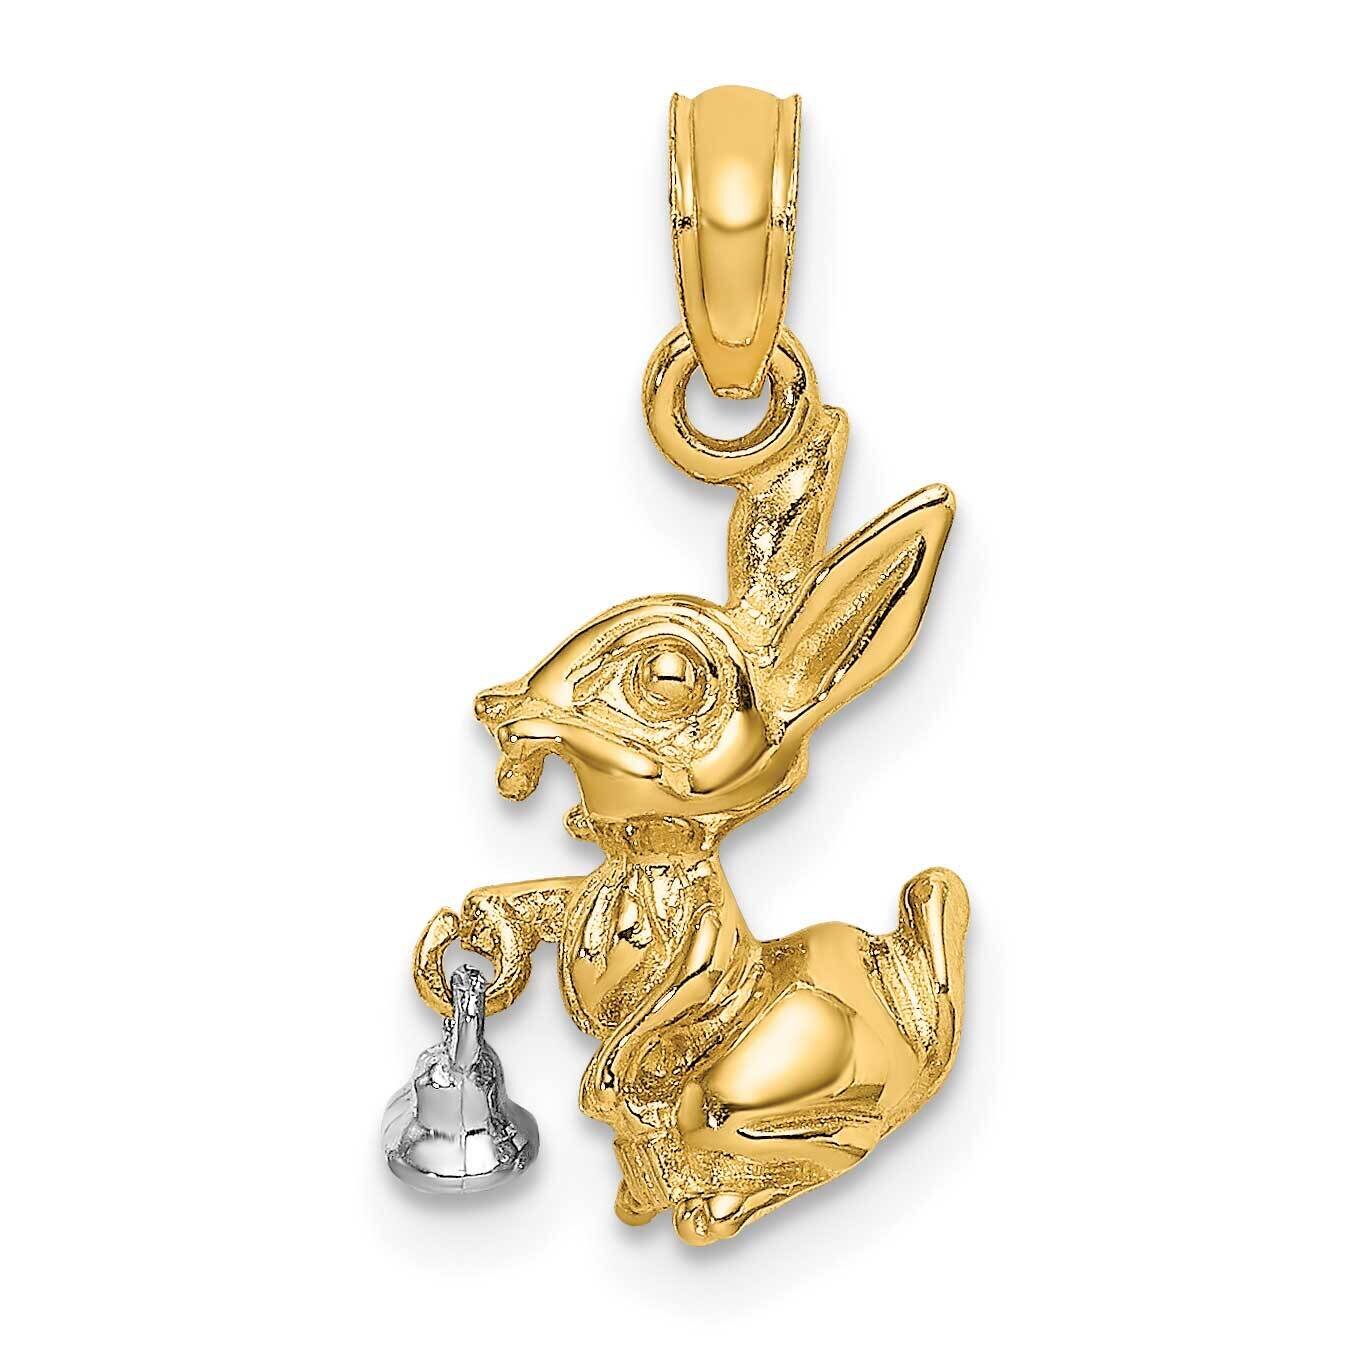 Moveable 3-D Bunny Rabbit Charm 14k Two-tone Gold K9279